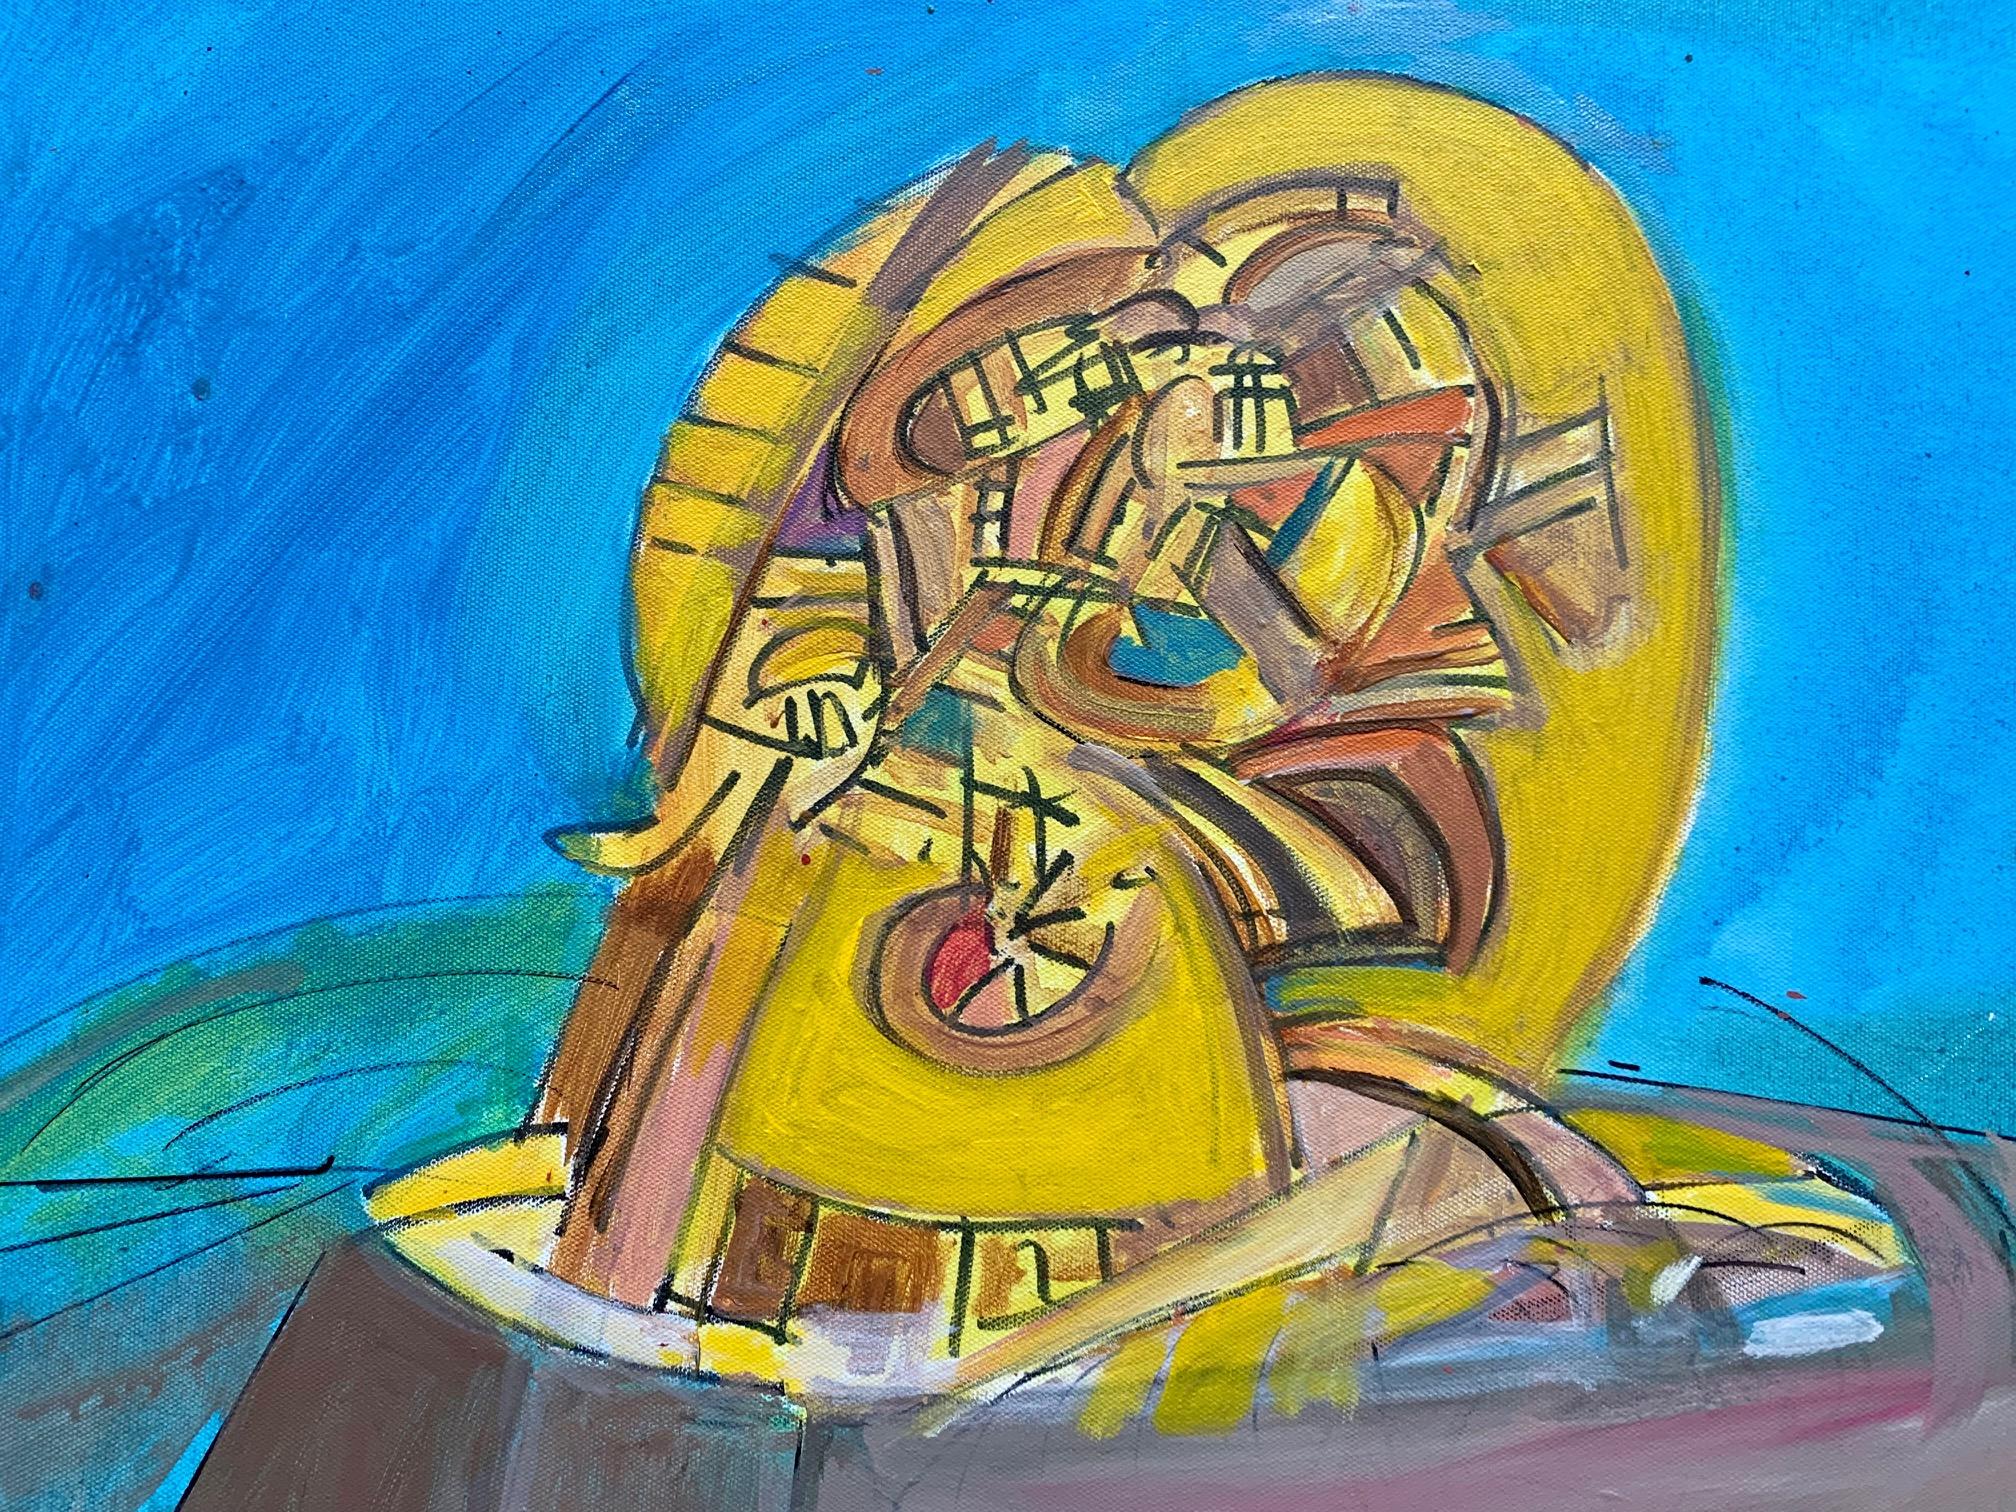 Frank Shifreen
The Prophet
2021
18 x 24 inches 
Acrylic on Canvas
Signed, titled and dated on verso

These new works start from polar opposite impulses which juxtapose the purity and beauty of platonic forms opposed to impulsive muscular